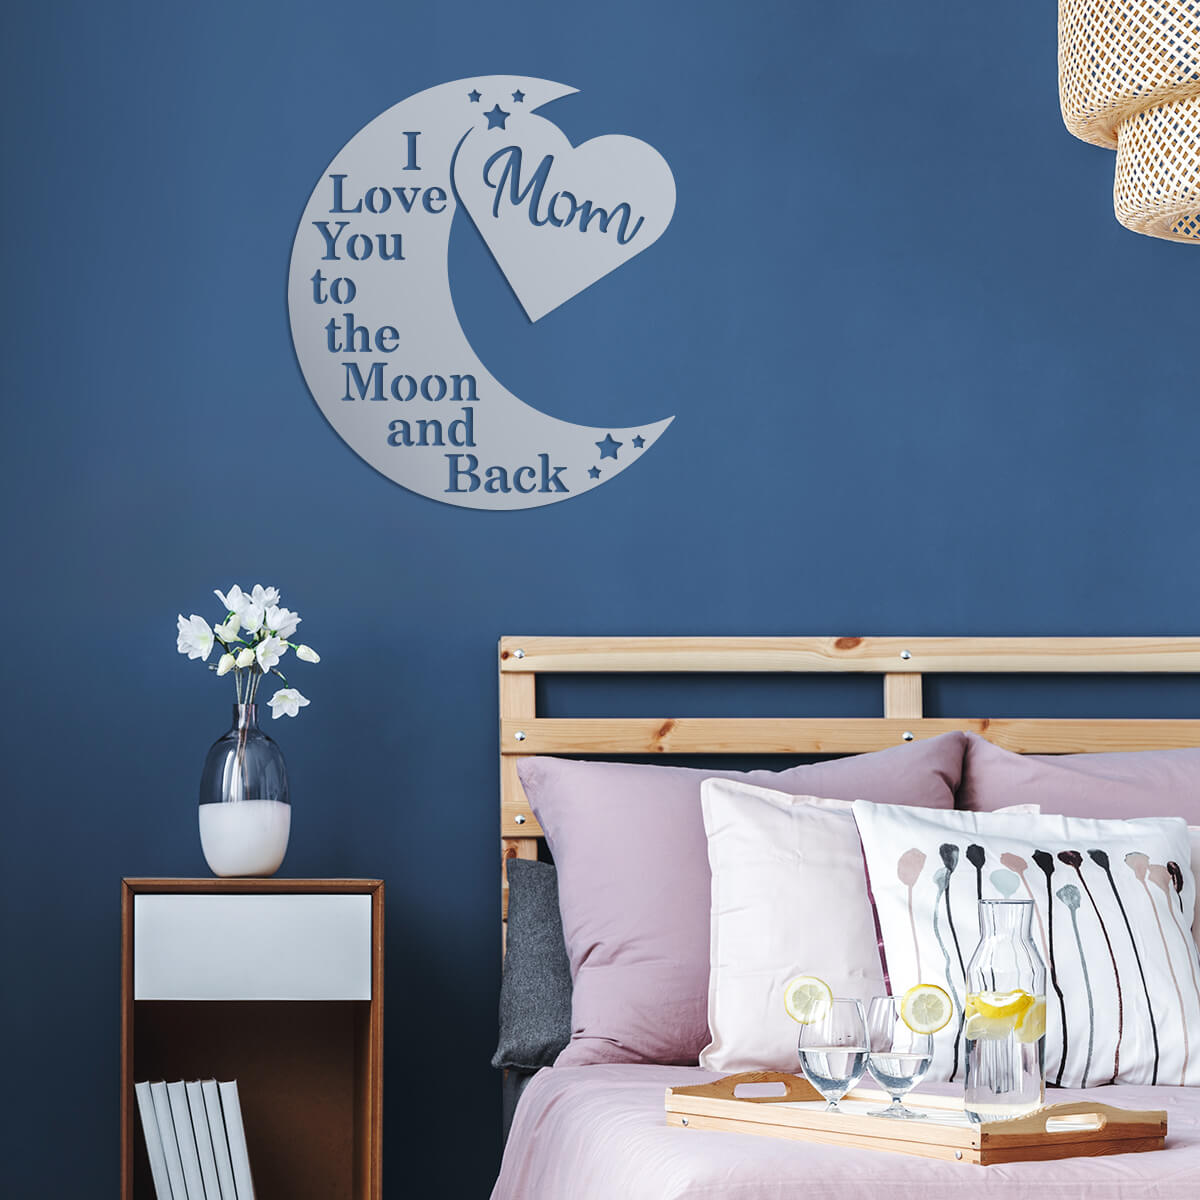 Love You To The Moon Wall Art Mom Ltd Realsteel Center